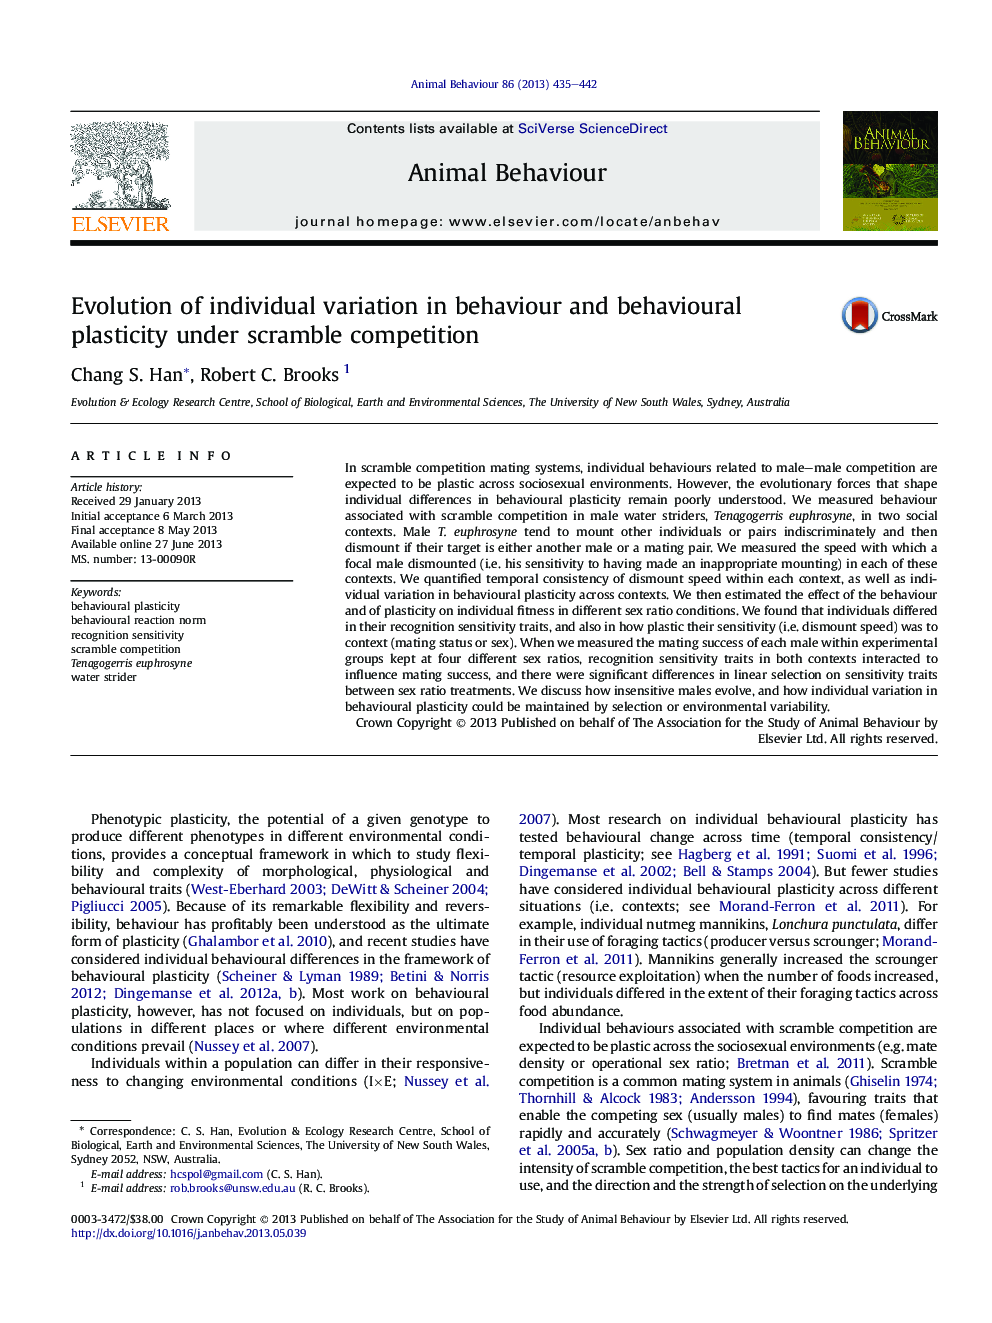 Evolution of individual variation in behaviour and behavioural plasticity under scramble competition